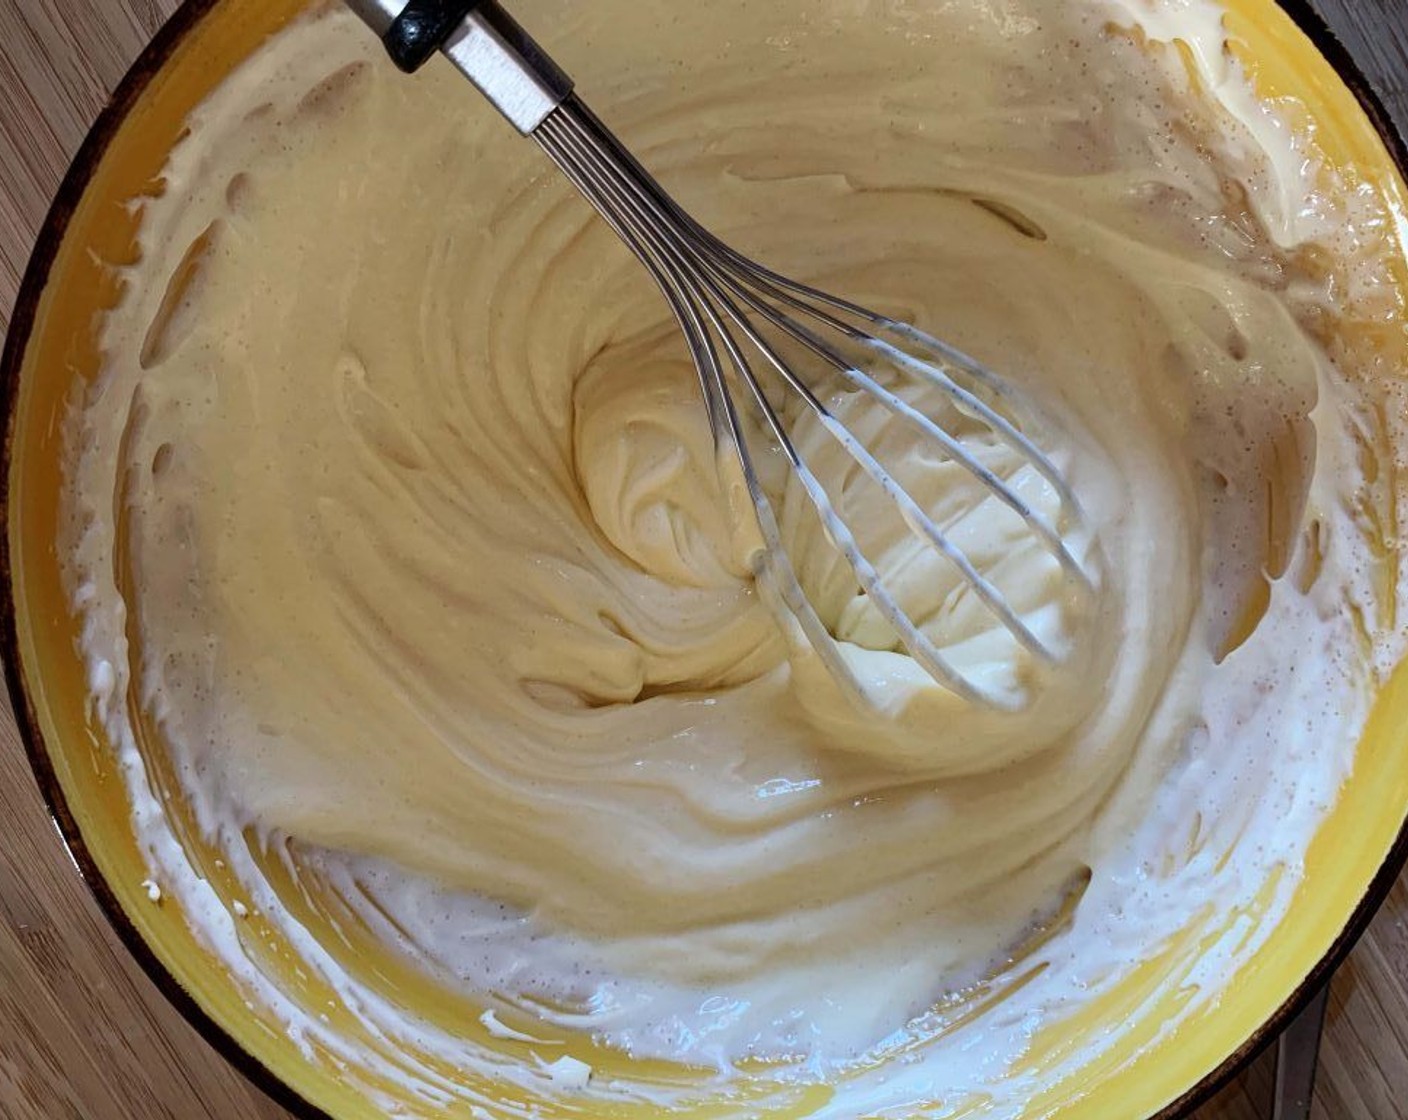 step 4 In a large bowl whisk yolks of the Eggs (3), Vanilla Extract (1 tsp), Granulated Sugar (1/2 cup) and Mascarpone Cheese (1 cup) until you get a smooth cream.